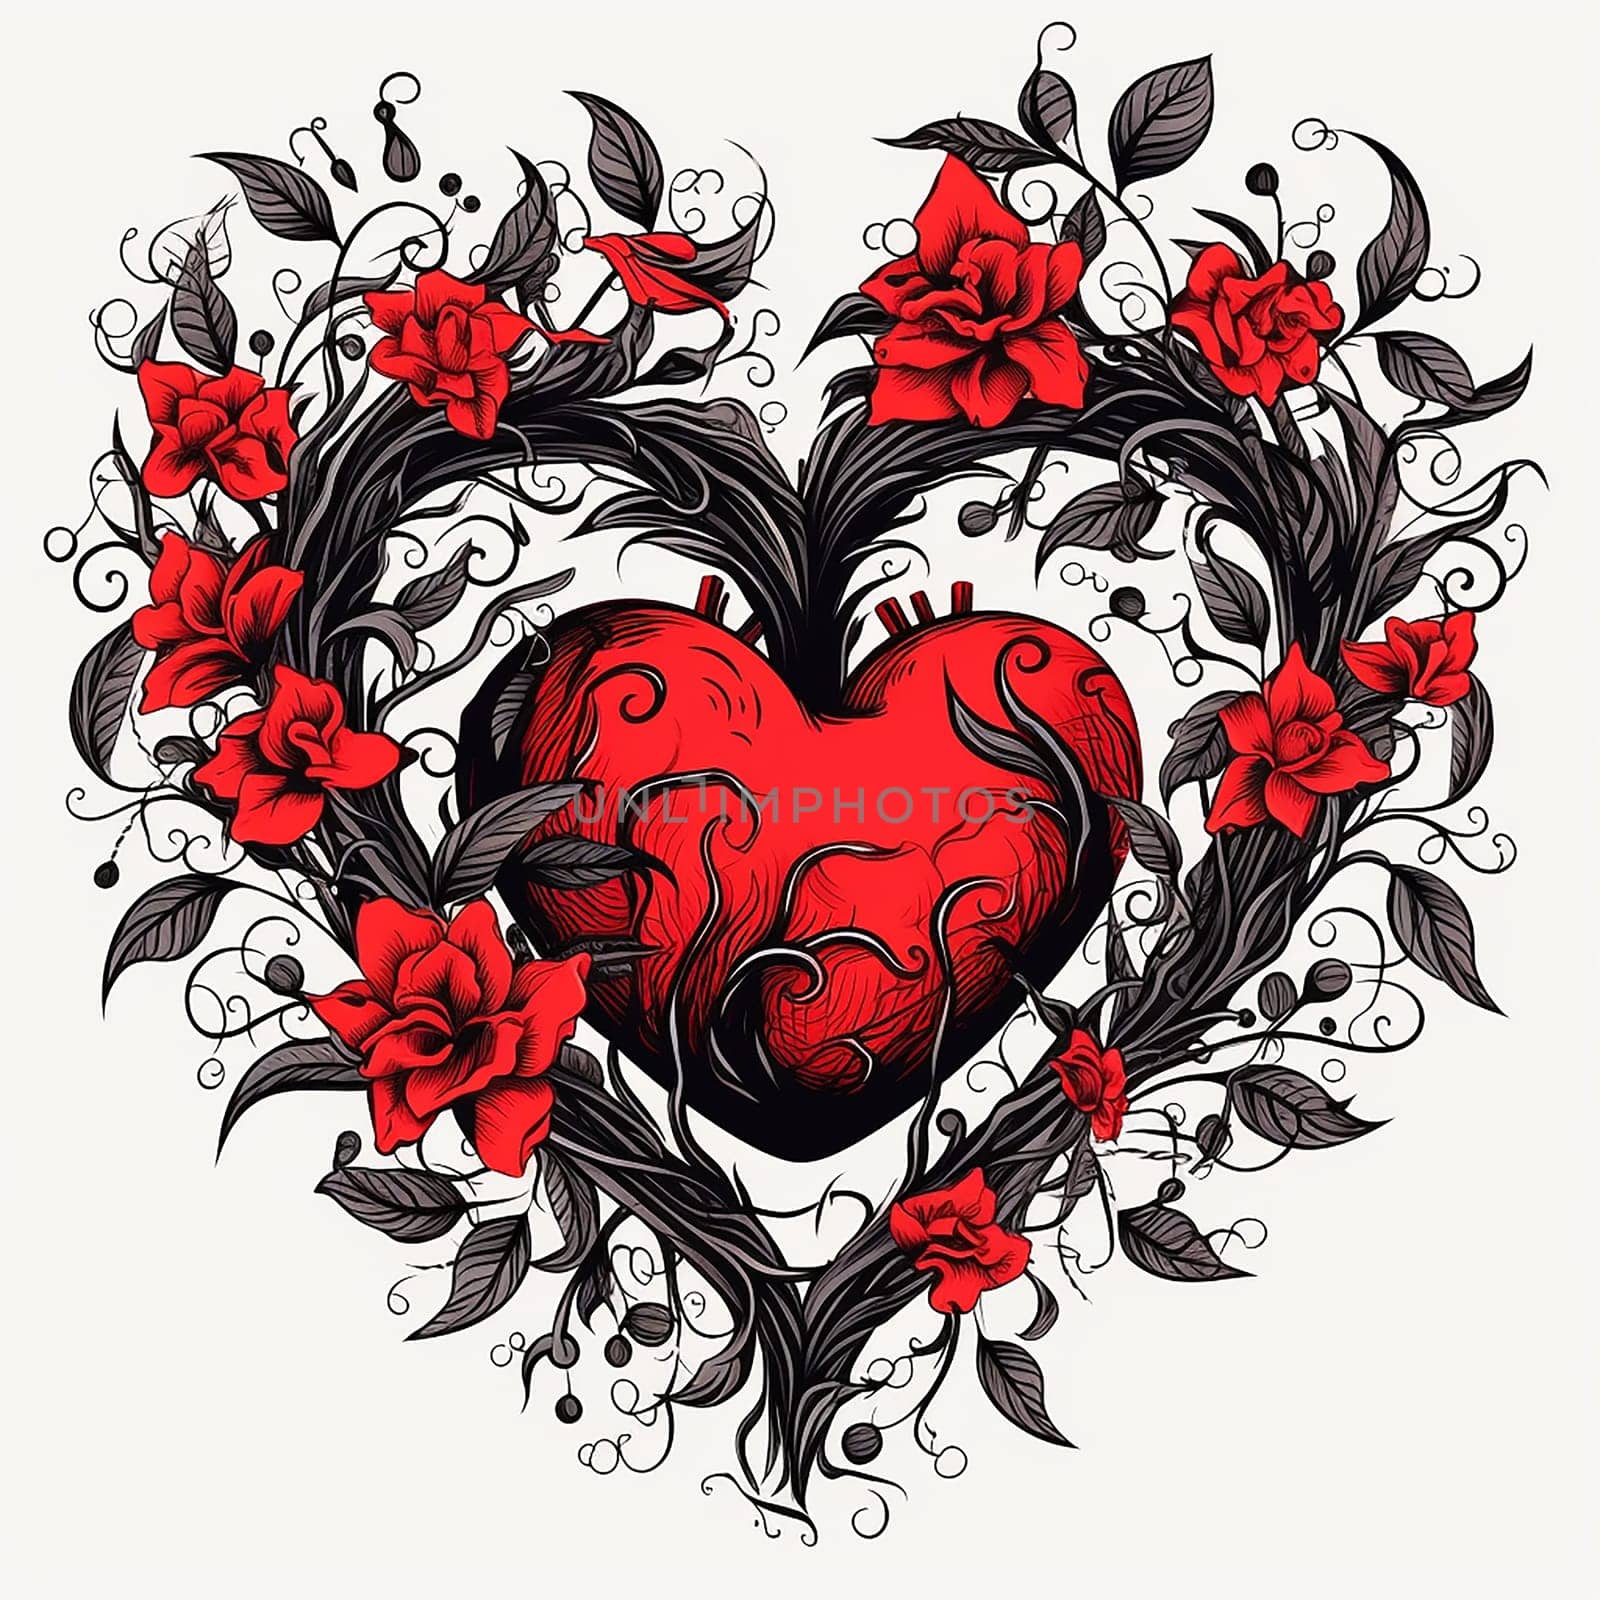 A vivid illustration of a heart entwined with ornate red roses and black flourishes. by Hype2art